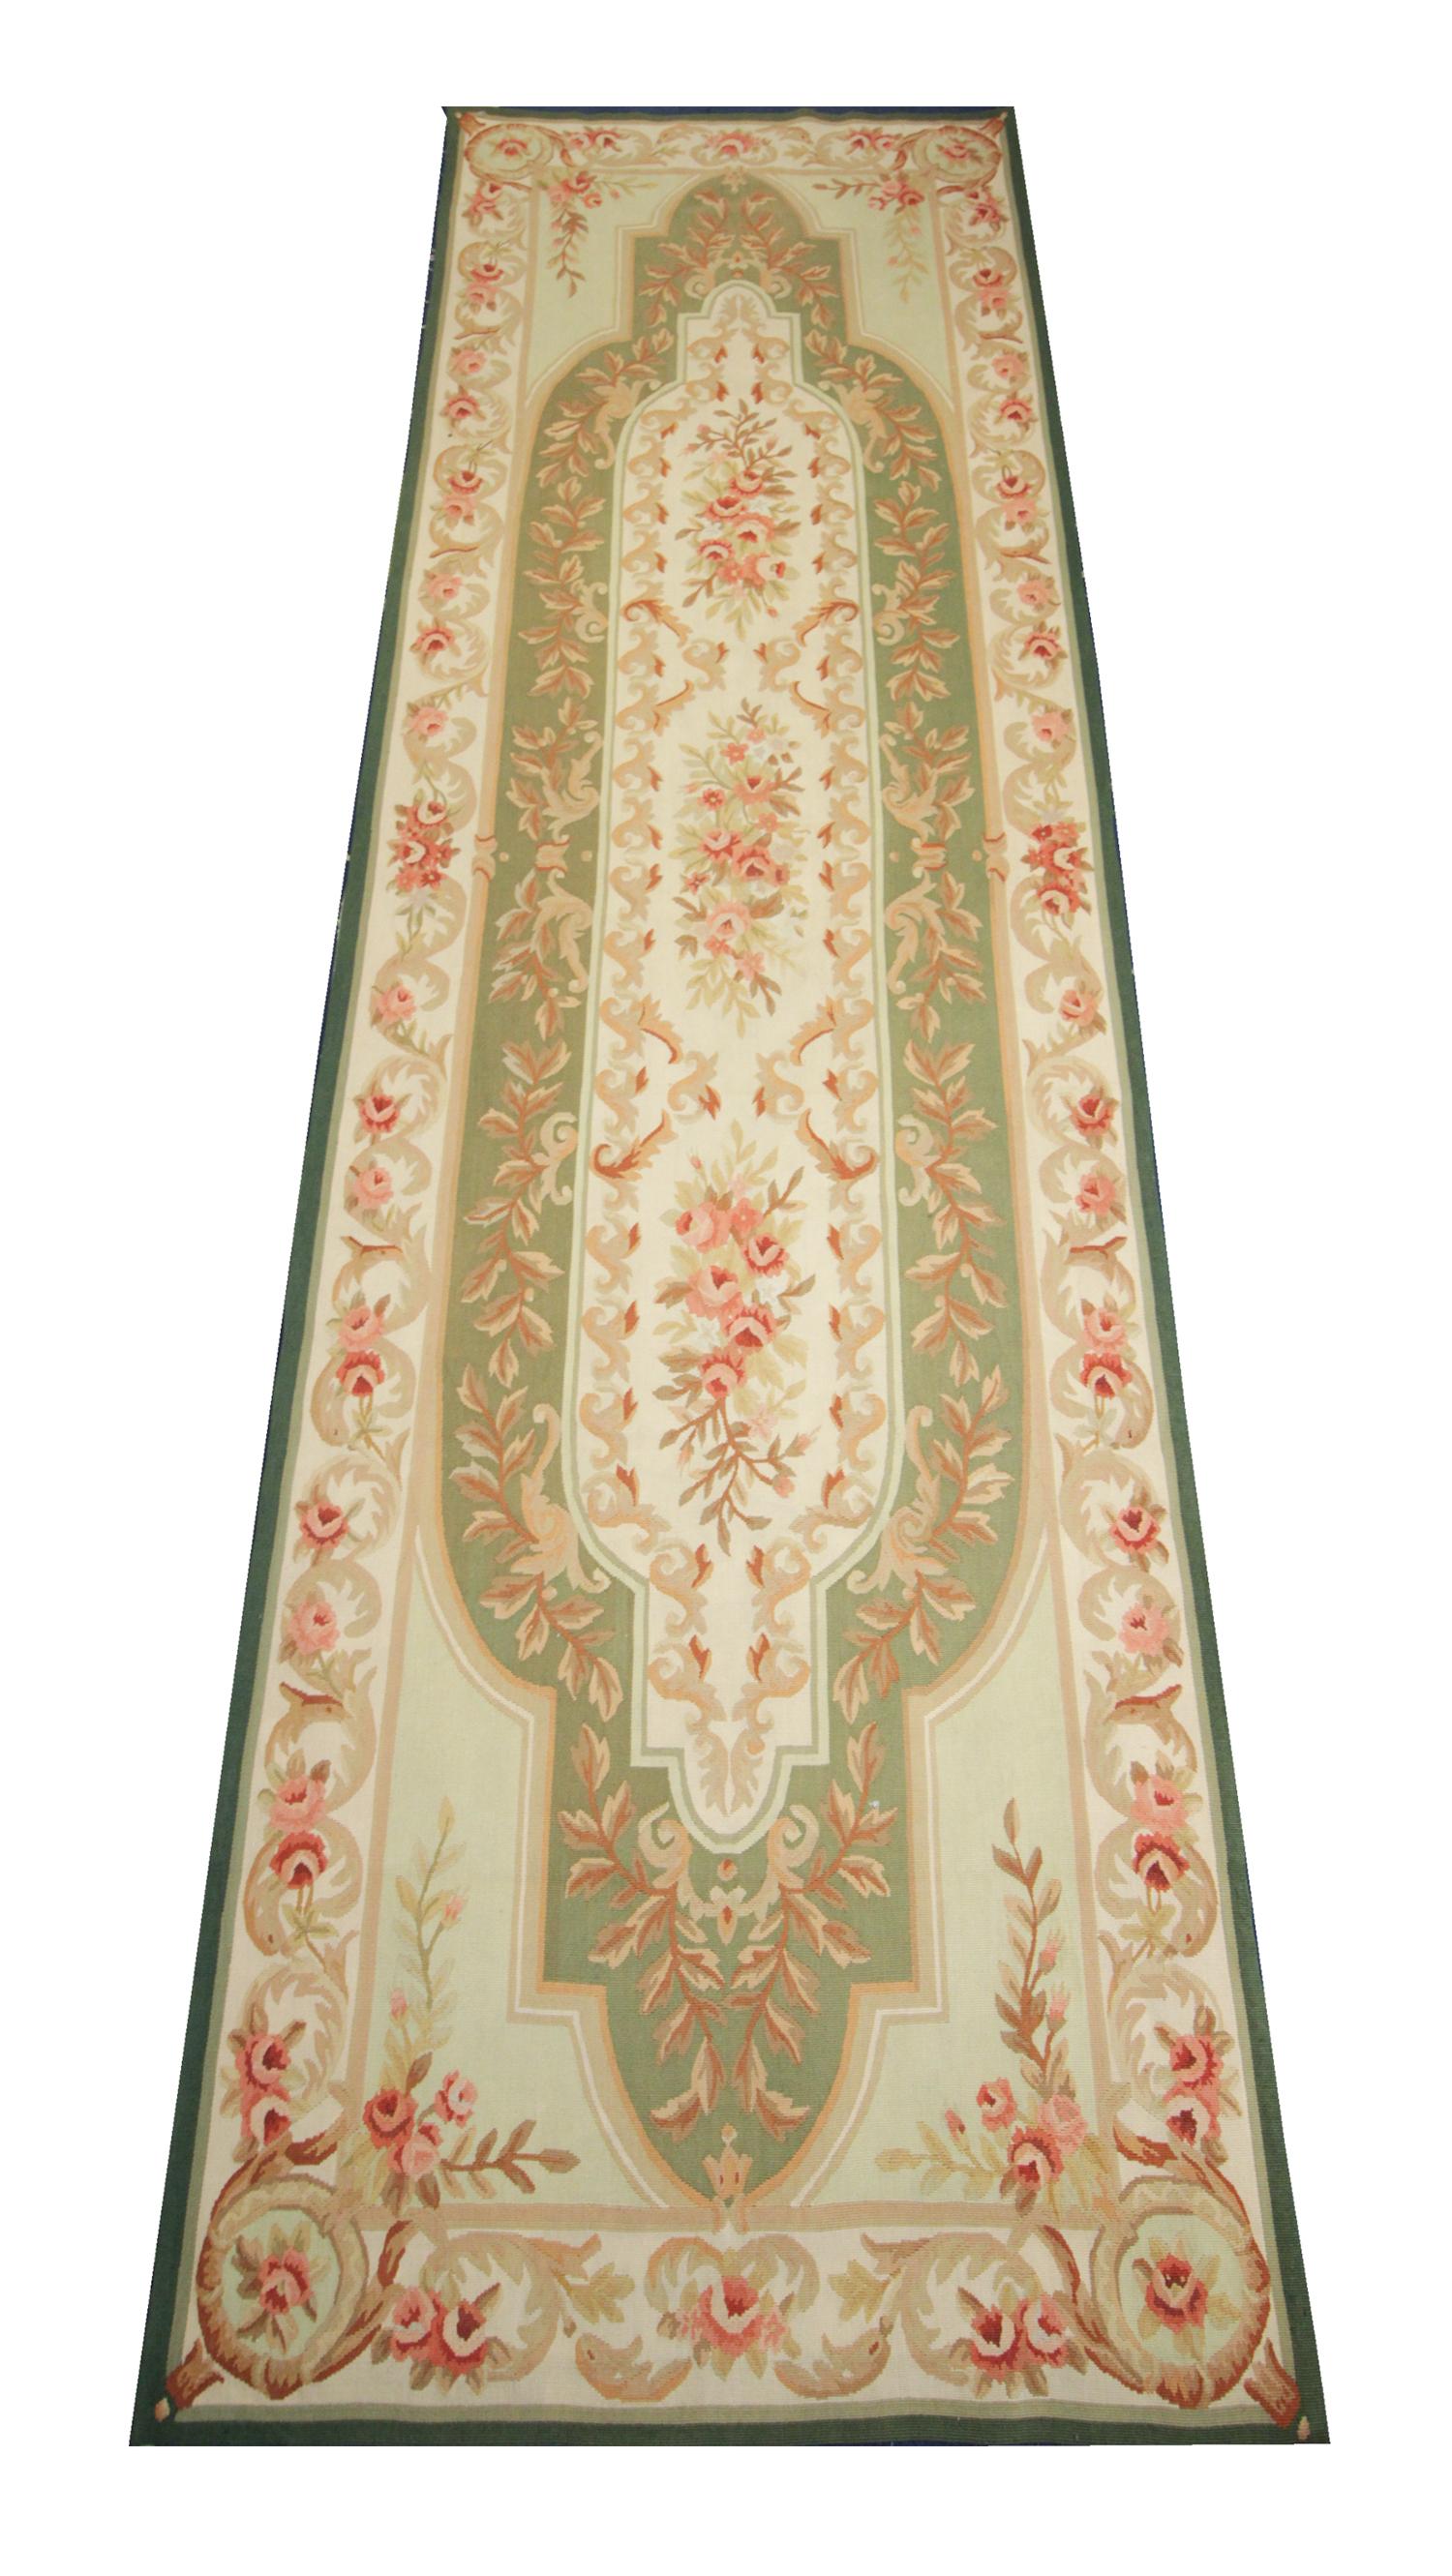 This handwoven Oriental needlepoint rug was woven runner by hand in China in the early 21st century. The central design features a symmetrical floral pattern woven with a unique color palette including green, cream, pink and beige. This fine